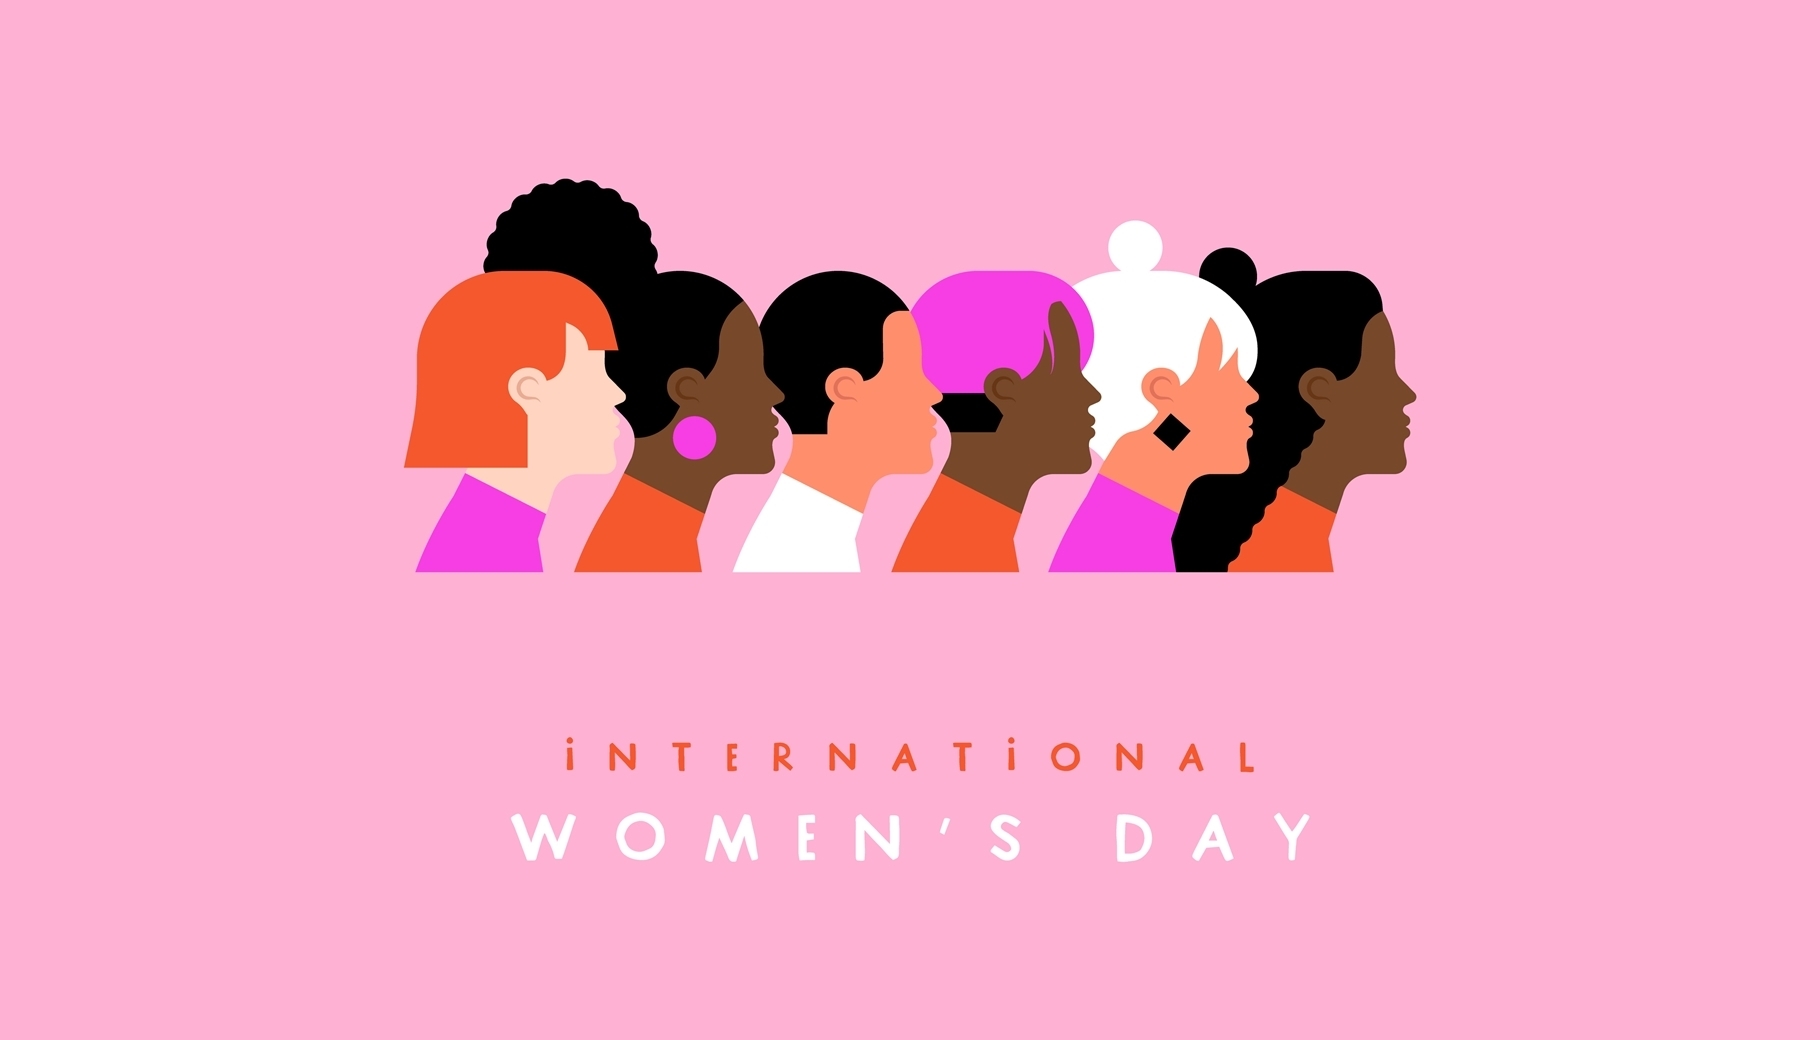 International Women's Day - Our Team's Thoughts